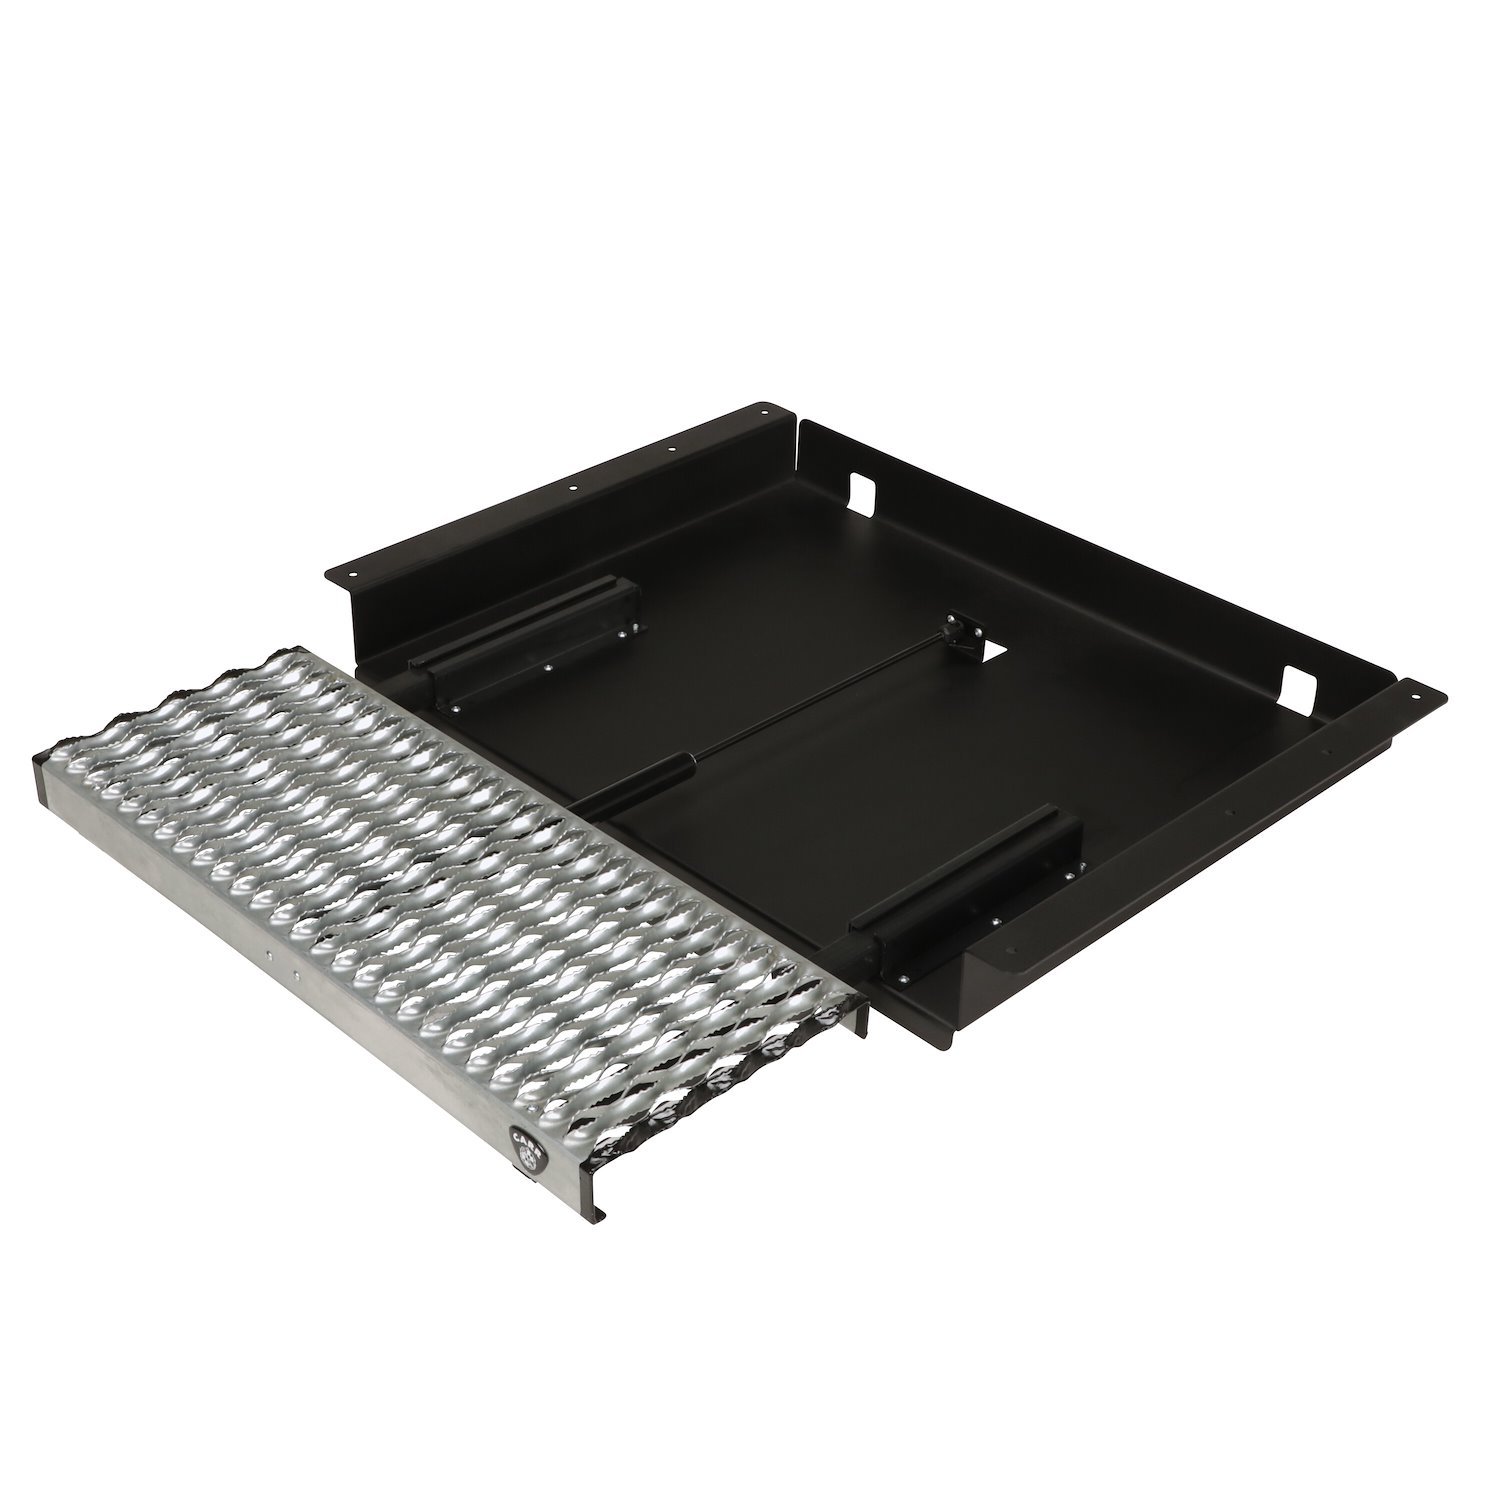 501060 WTS 31 in. Retractable Step, Undermount - Extended Flat Surface [XP3 Black/Galvanized]